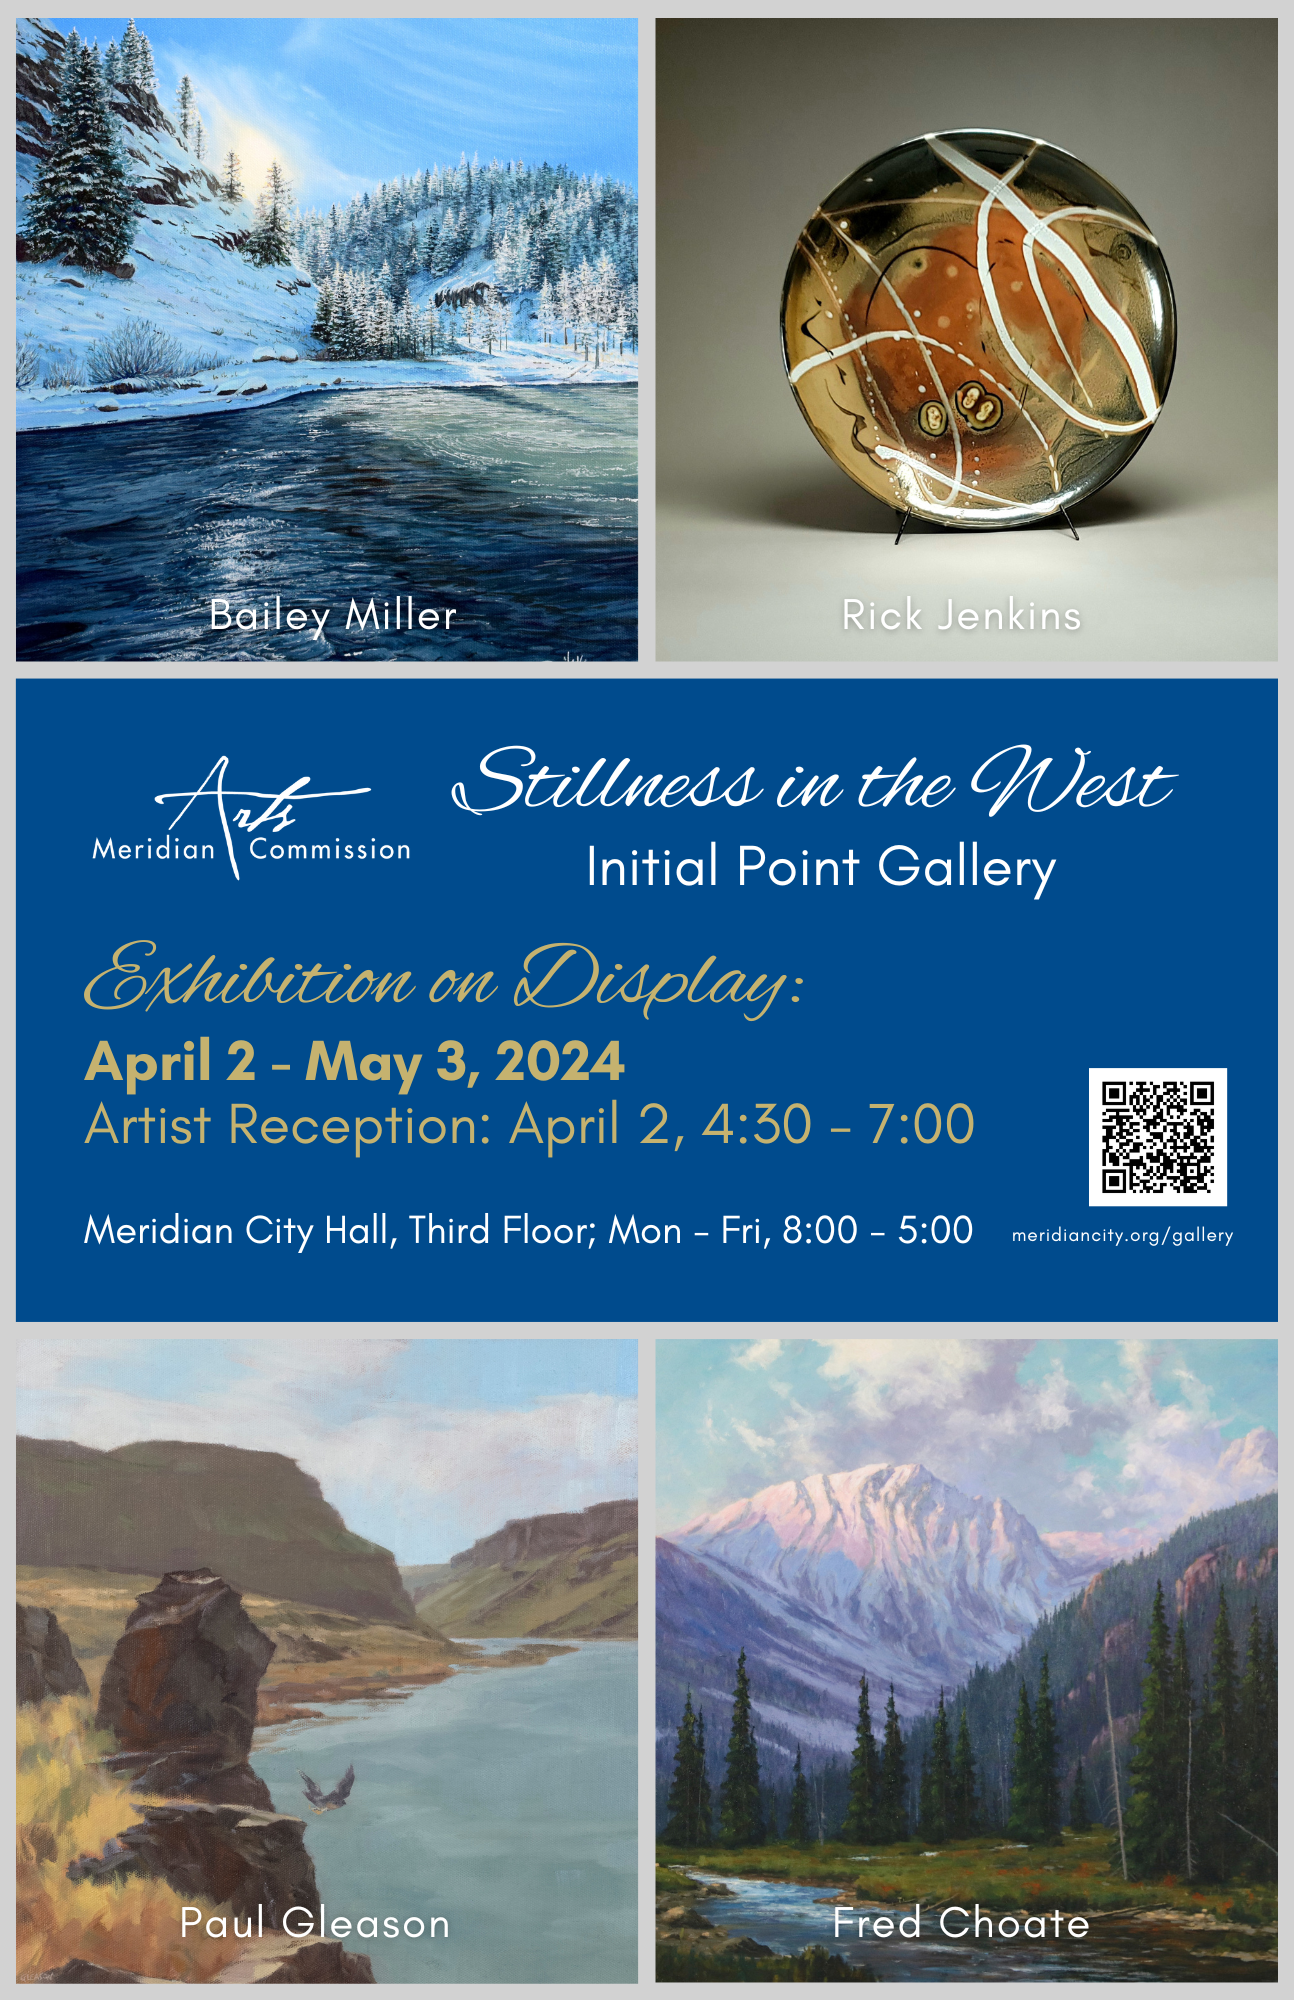 Graphic of four artworks in landscape painting and ceramic mediums and text for Initial Point Gallery show from April 2 - May 3